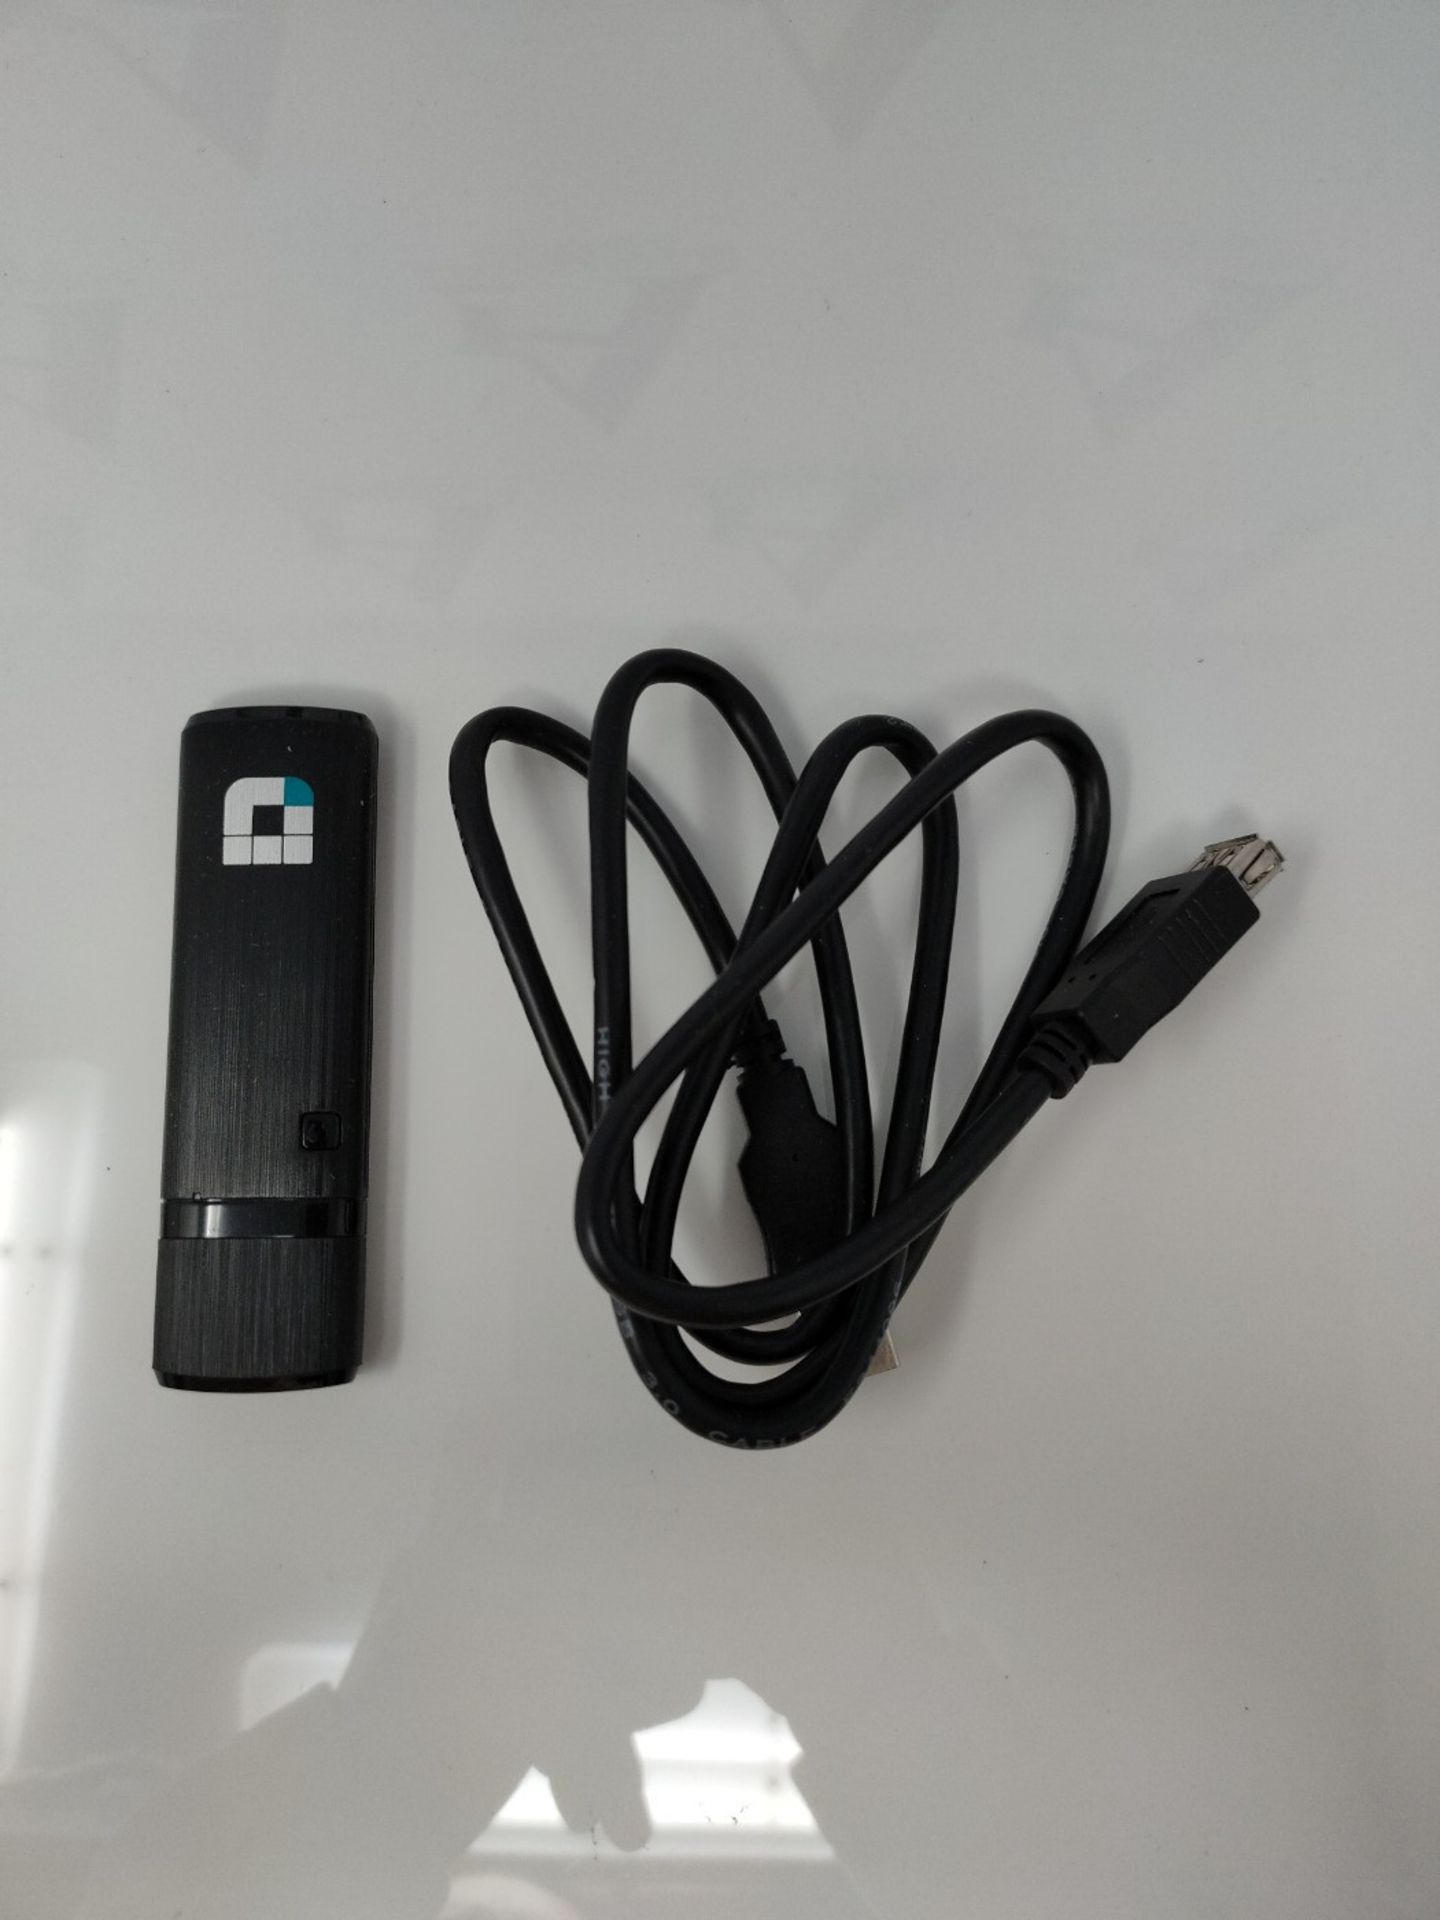 D-Link DWA-182 Wireless AC USB Adapter, AC1300, MU-MIMO, Dual Band, Compatible with Wi - Image 3 of 3